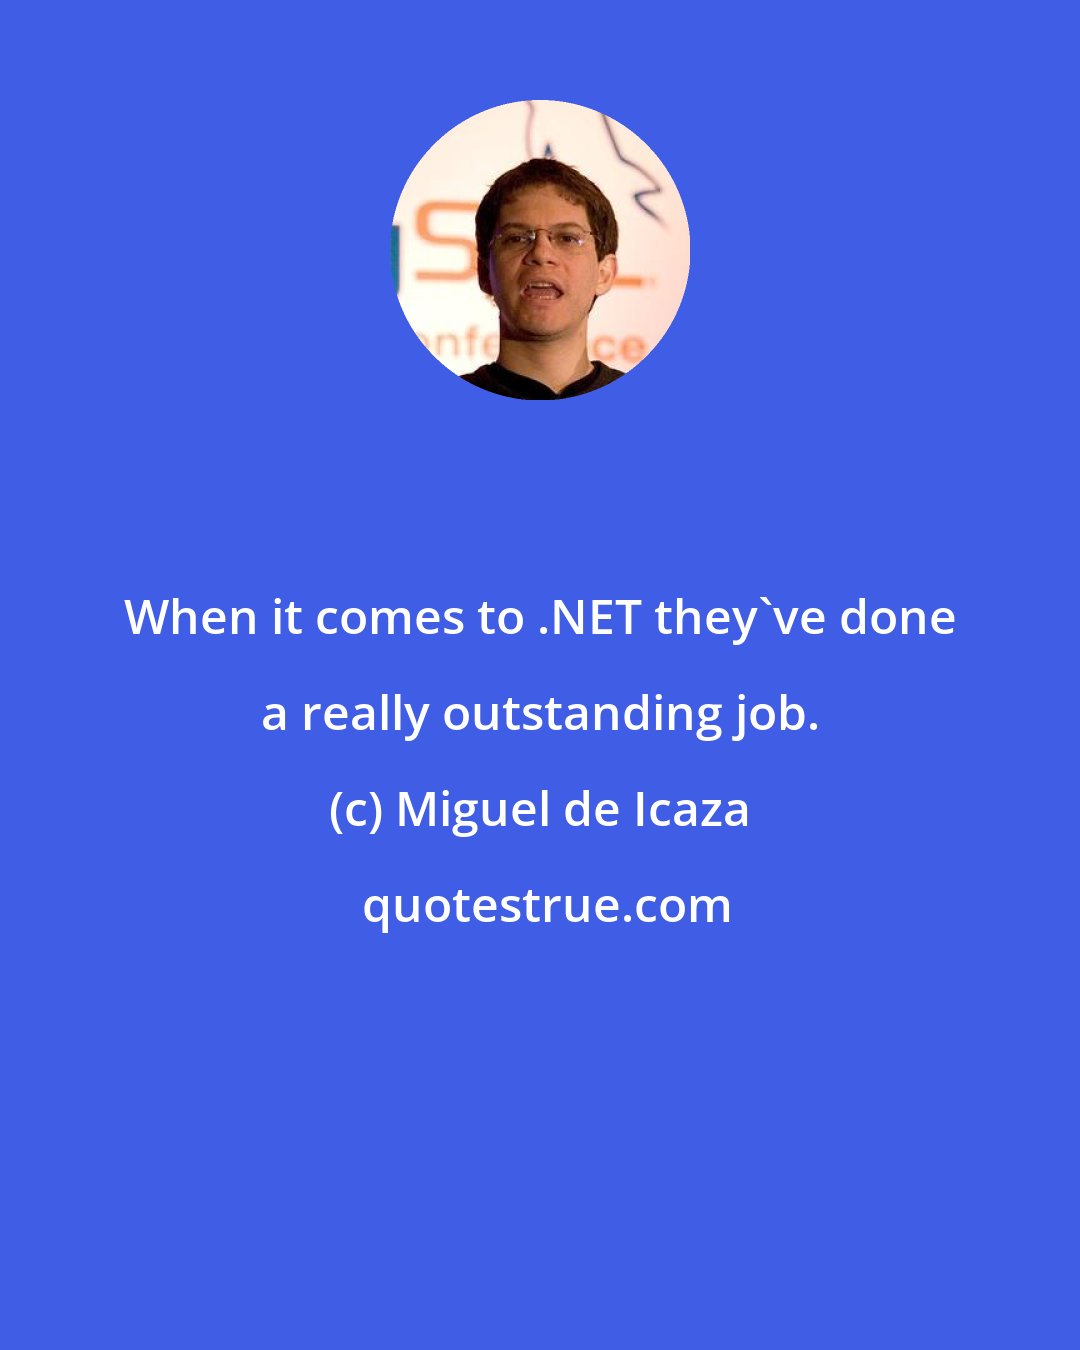 Miguel de Icaza: When it comes to .NET they've done a really outstanding job.